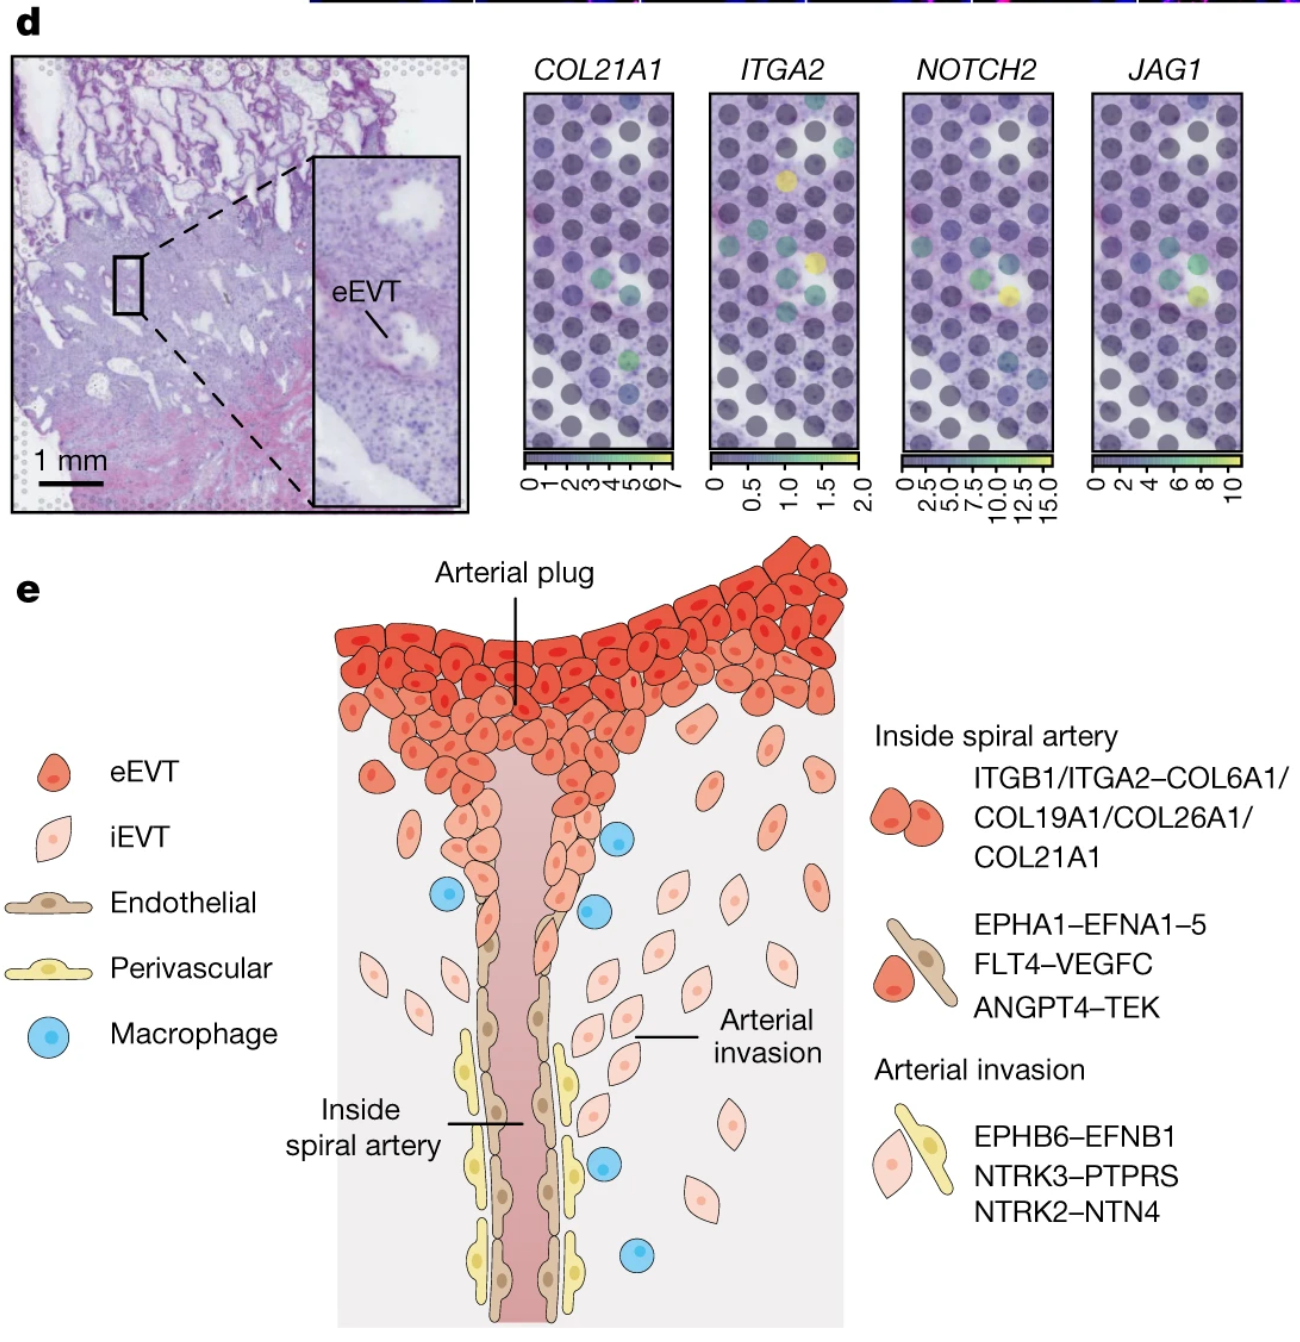 Figure 5d,e from Arutyunyan et al. d. Overview of spatial locations of invading trophoblast cell states in Visium spatial transcriptomics data of a representative section of donor P13 tissue. The position of the Capture Area is indicated with an arrow in Extended Data Fig. 1d. Spot color indicates cell state densities computed by cell2location as the number of cells of a given cell state in a Visium spot. e. Schematic representation of the spiral arteries in the first trimester of human pregnancy, highlighting the novel interactions between perivascular (PV)–iEVT, endothelial–eEVT, and eEVT–eEVT. Credit: Arutyunyan A, et al. Spatial multiomics map of trophoblast development in early pregnancy. Nature 616: 143–151 (2023). doi: 10.1038/s41586-023-05869-0. (CC BY 4.0). 